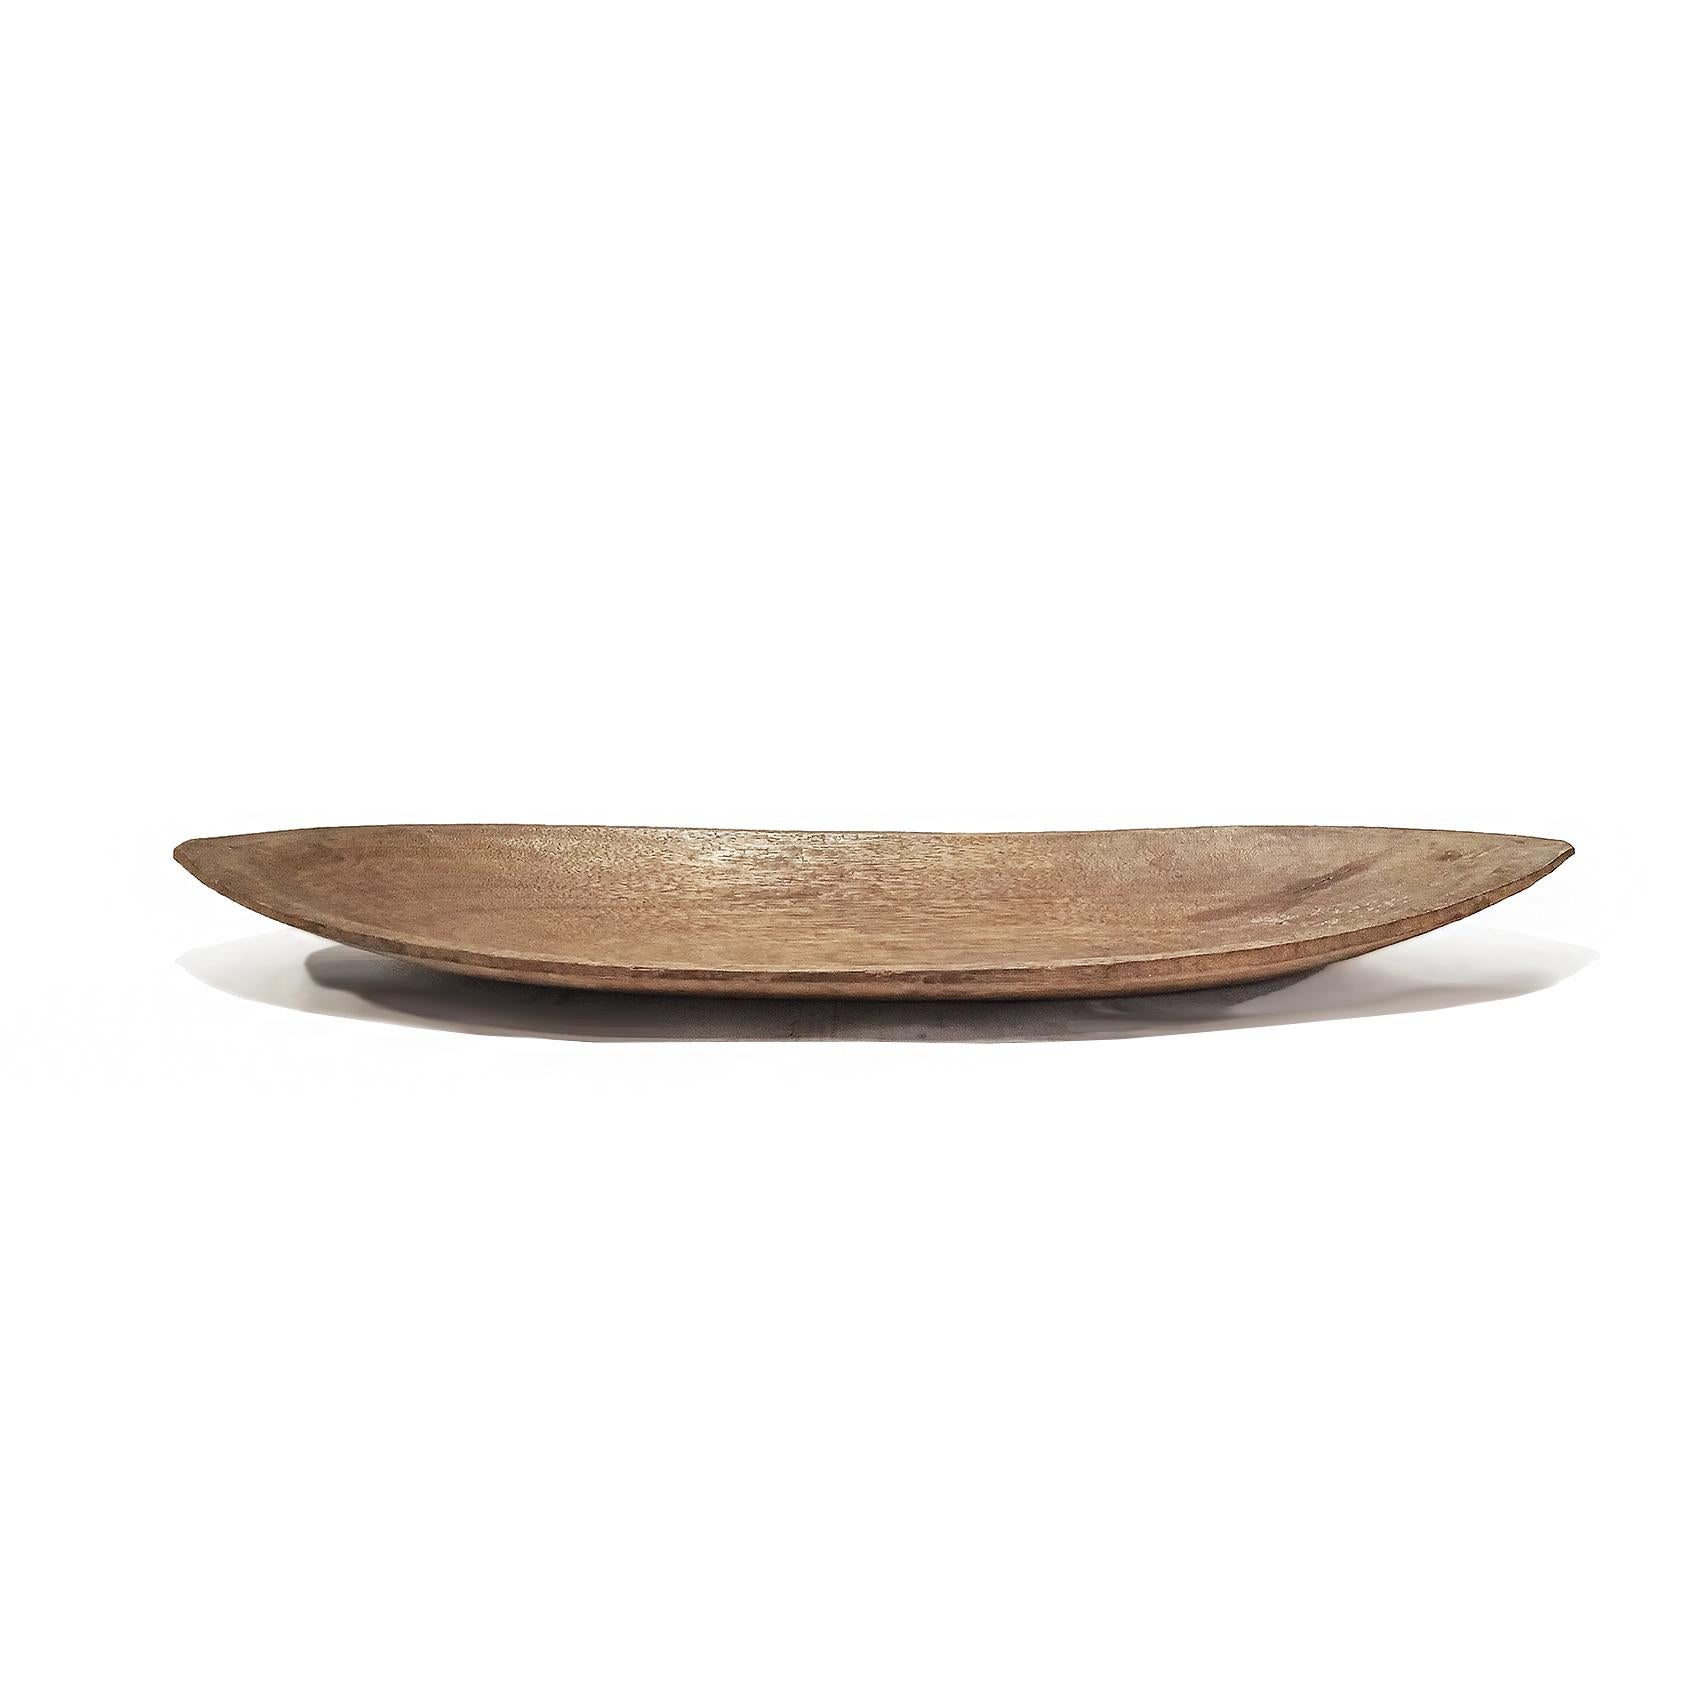 A large oval tray, hand-carved in Indonesia out of a single piece of Jackfruit wood. Rounded bottom. Natural color finish. 

42 inches wide, 13 inches deep, 3 inches high. 